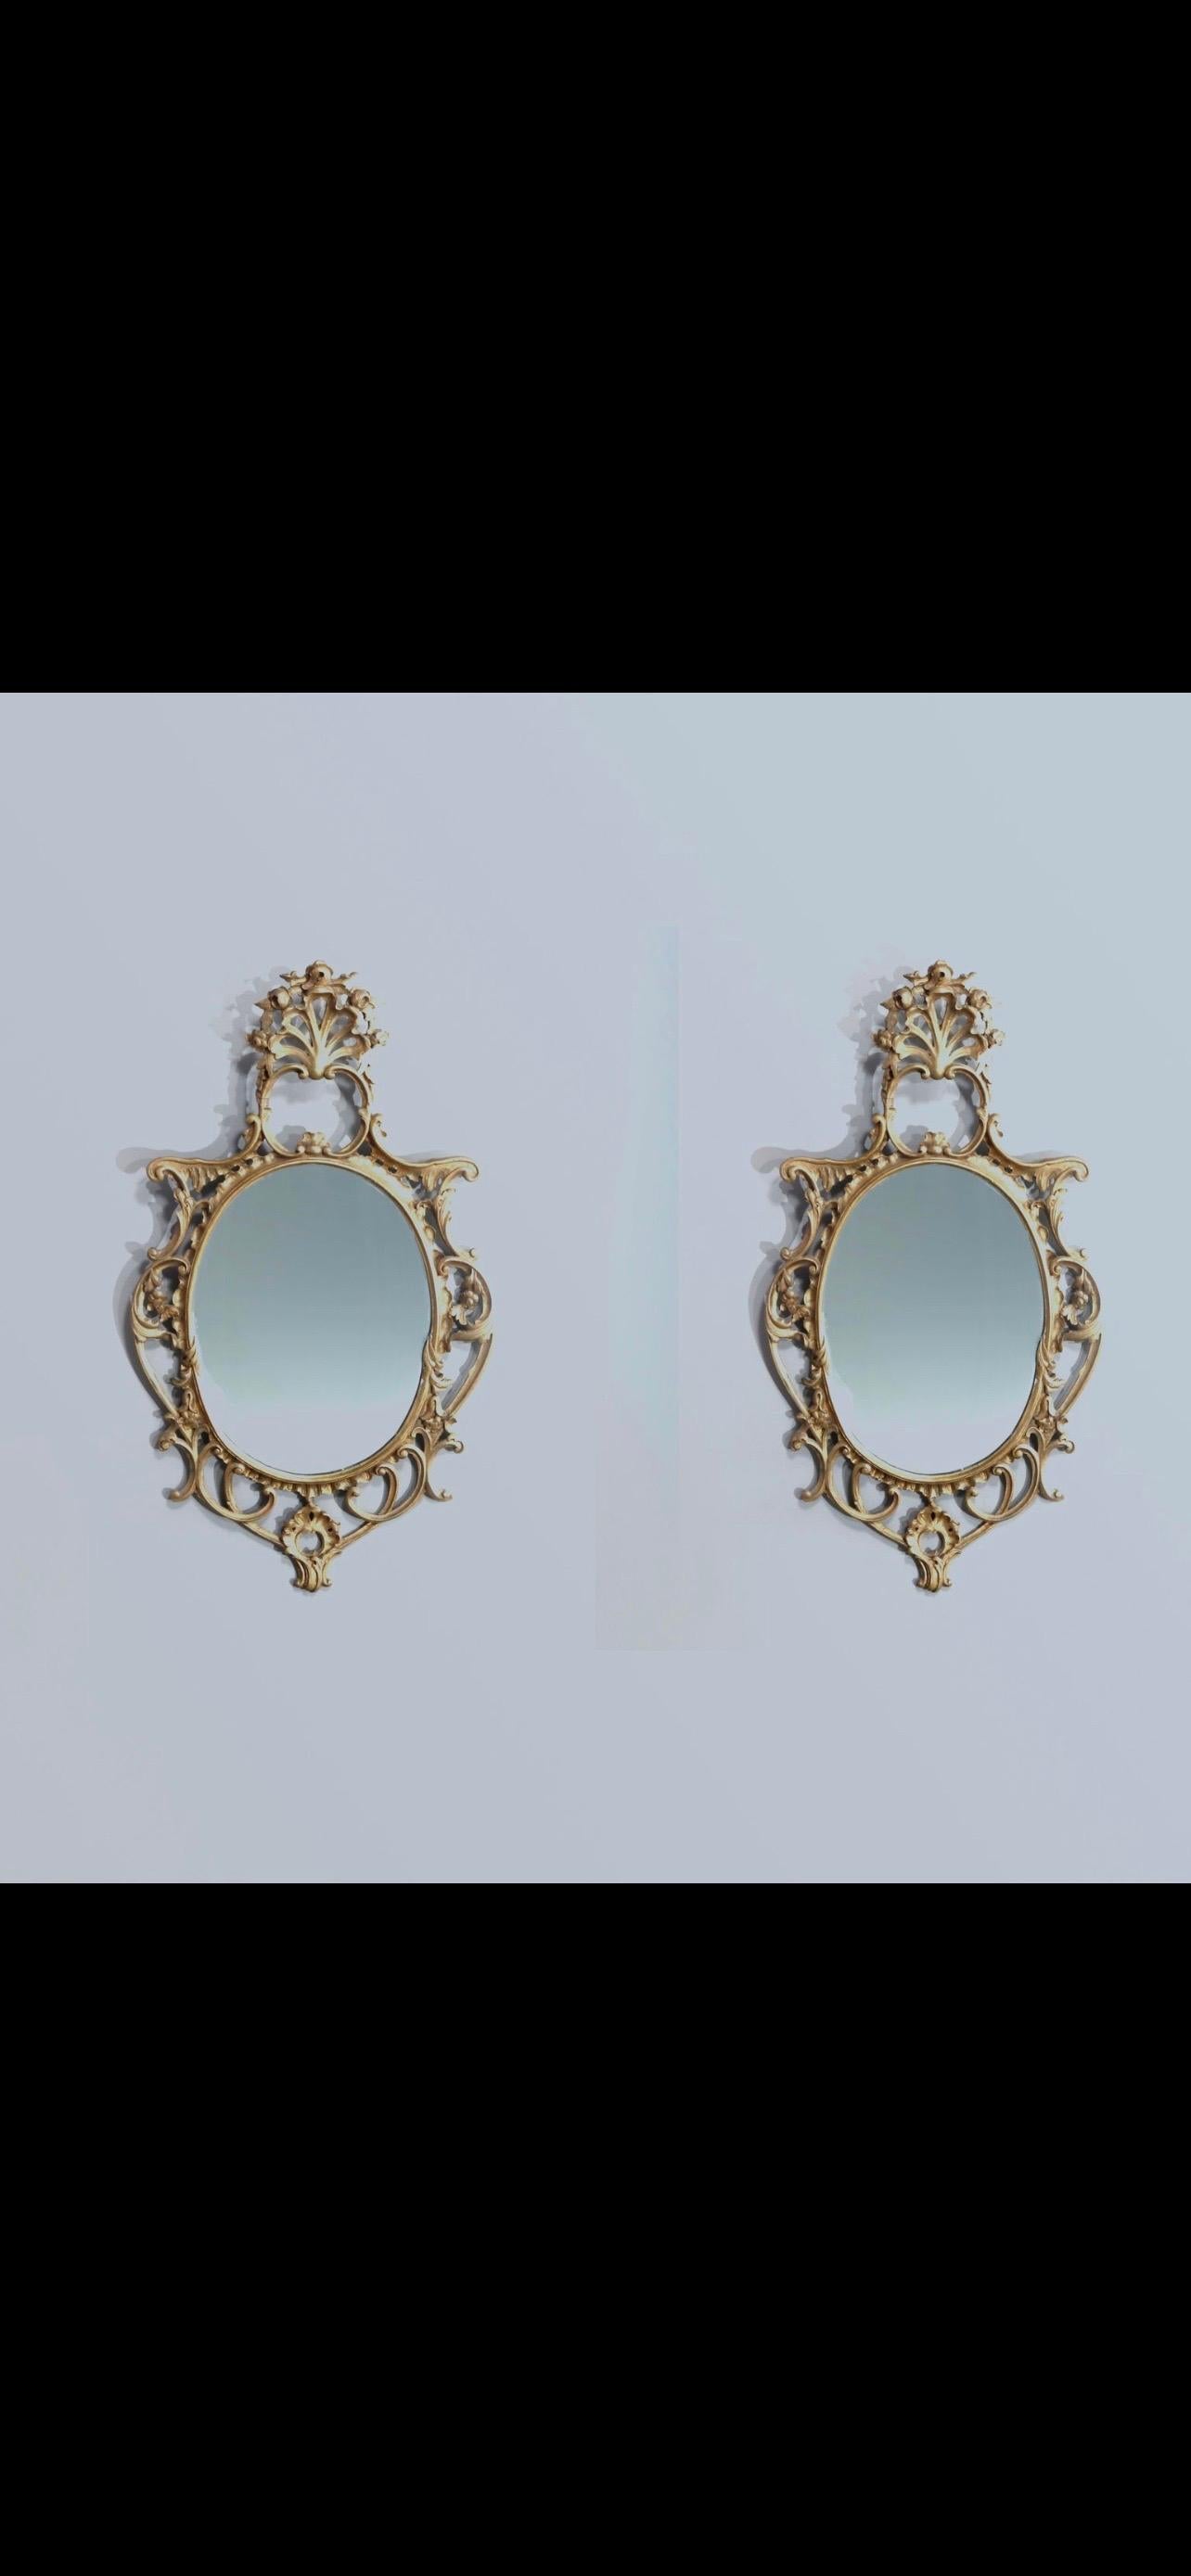 An antique and large French Louis XIV wall mirrors offer pierced giltwood frames with stylized shell crest and scroll, foliate and floral surrounds, 19th century
 
Measures: 44.5